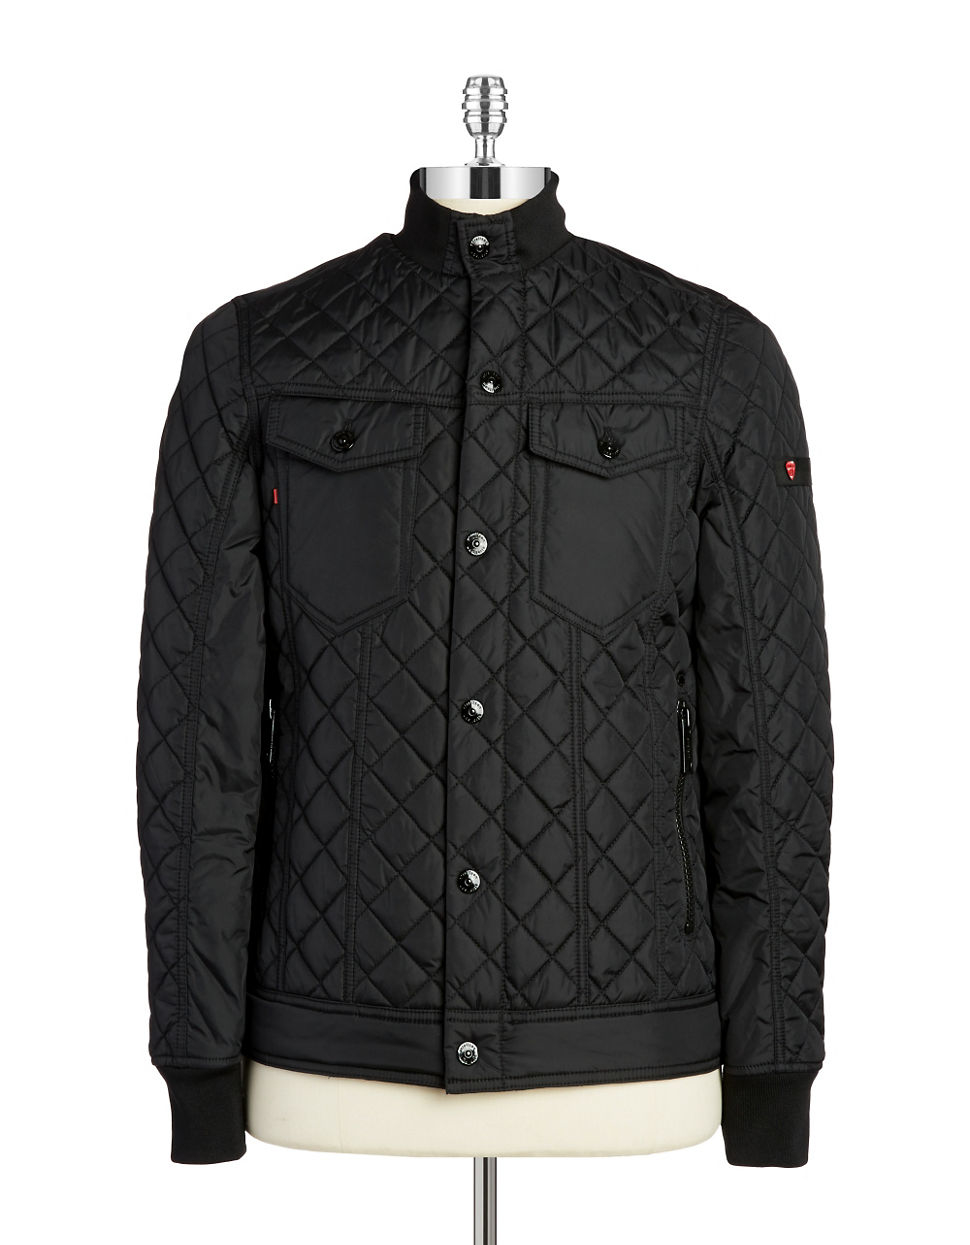 Lyst - Strellson Quilted Utility Jacket in Black for Men